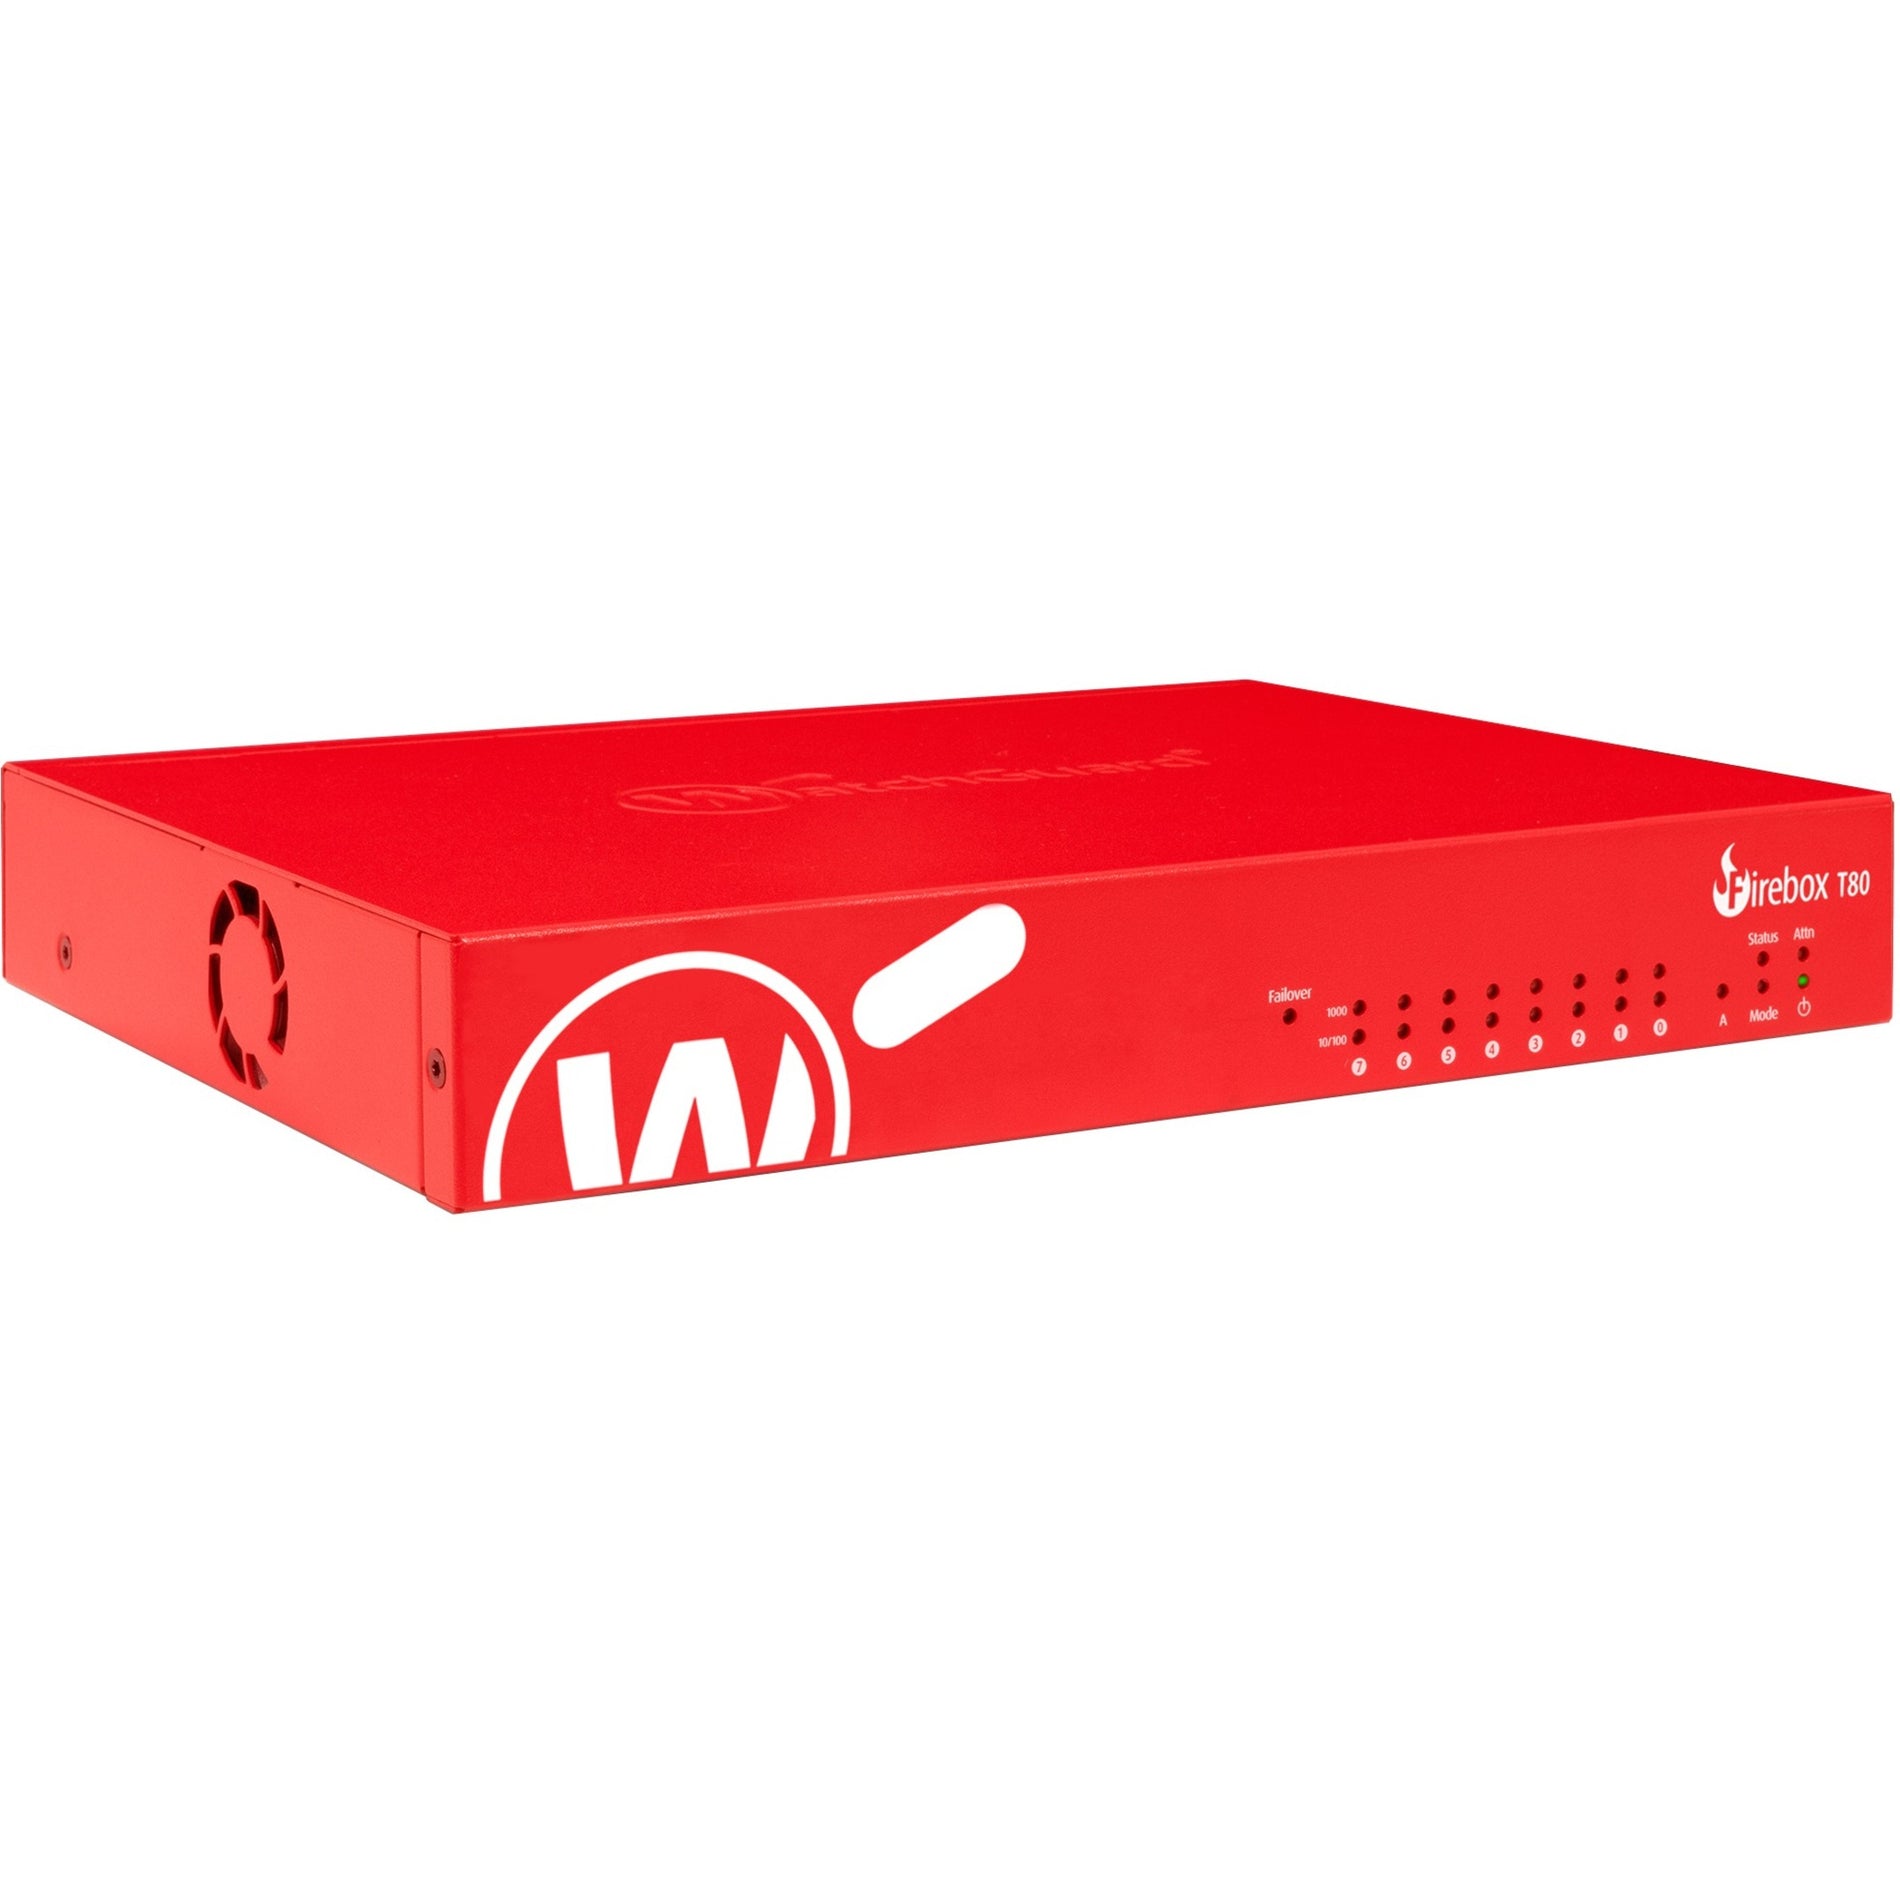 WatchGuard Firebox T80 Network Security/Firewall Appliance with 1-Year Basic Security Suite [Discontinued]